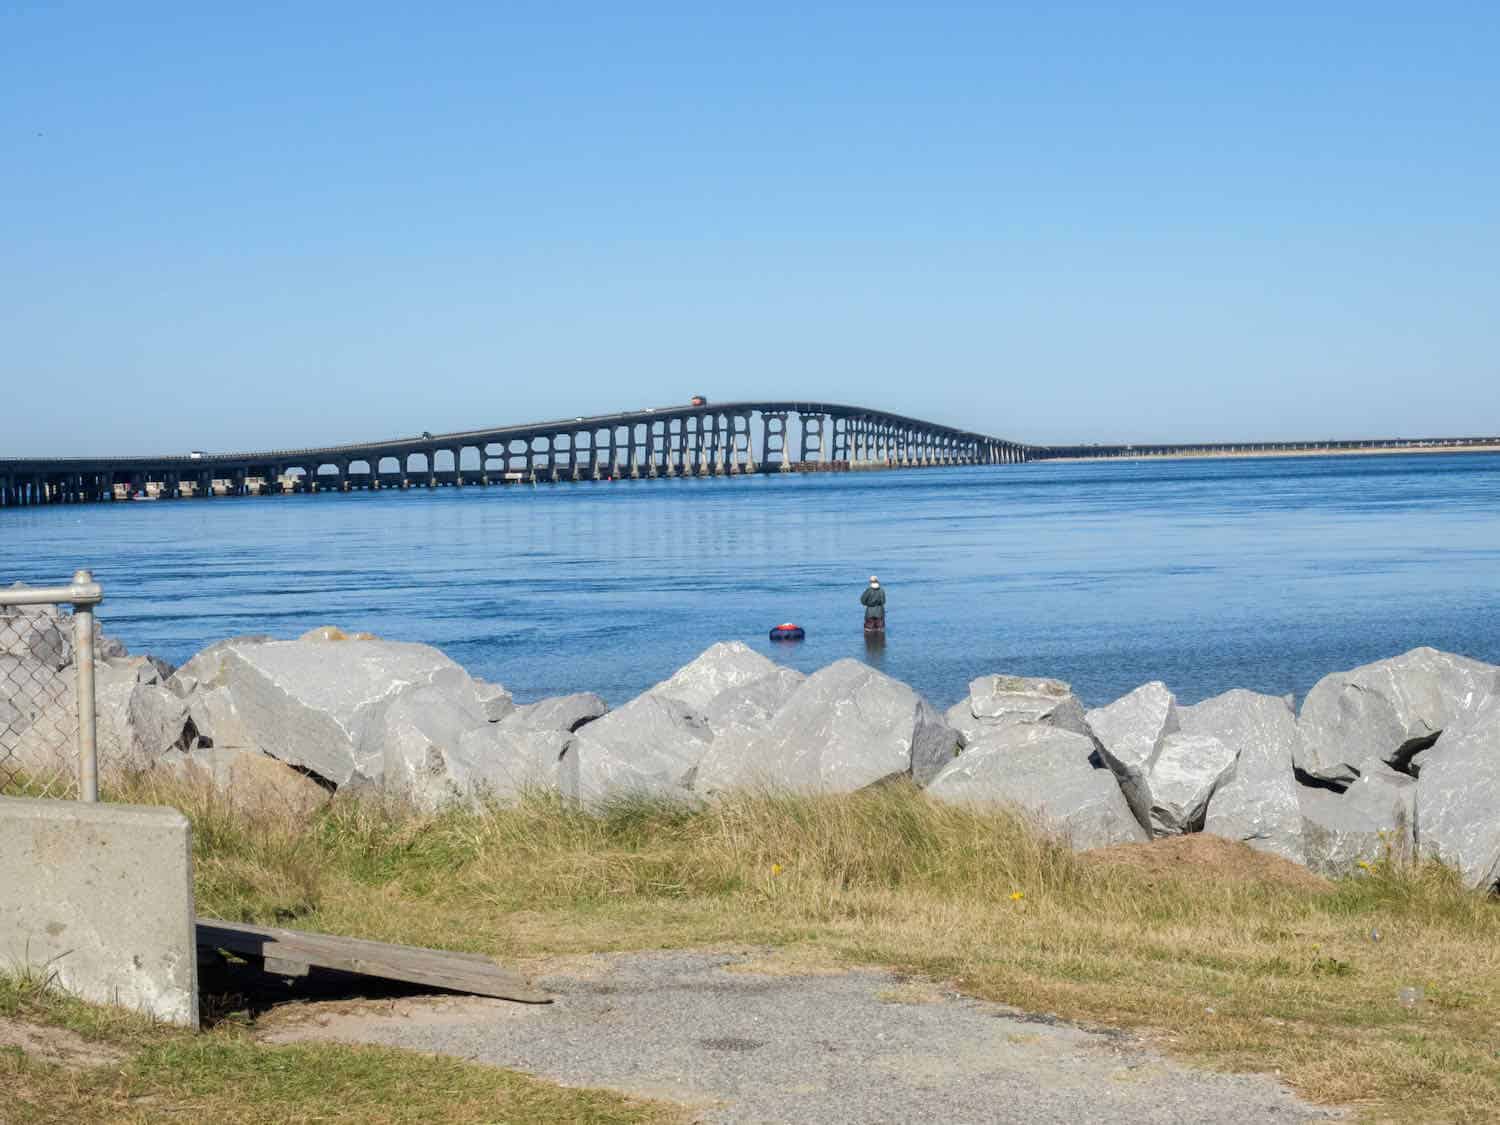 A long bridge arches over the water on the Outer Banks